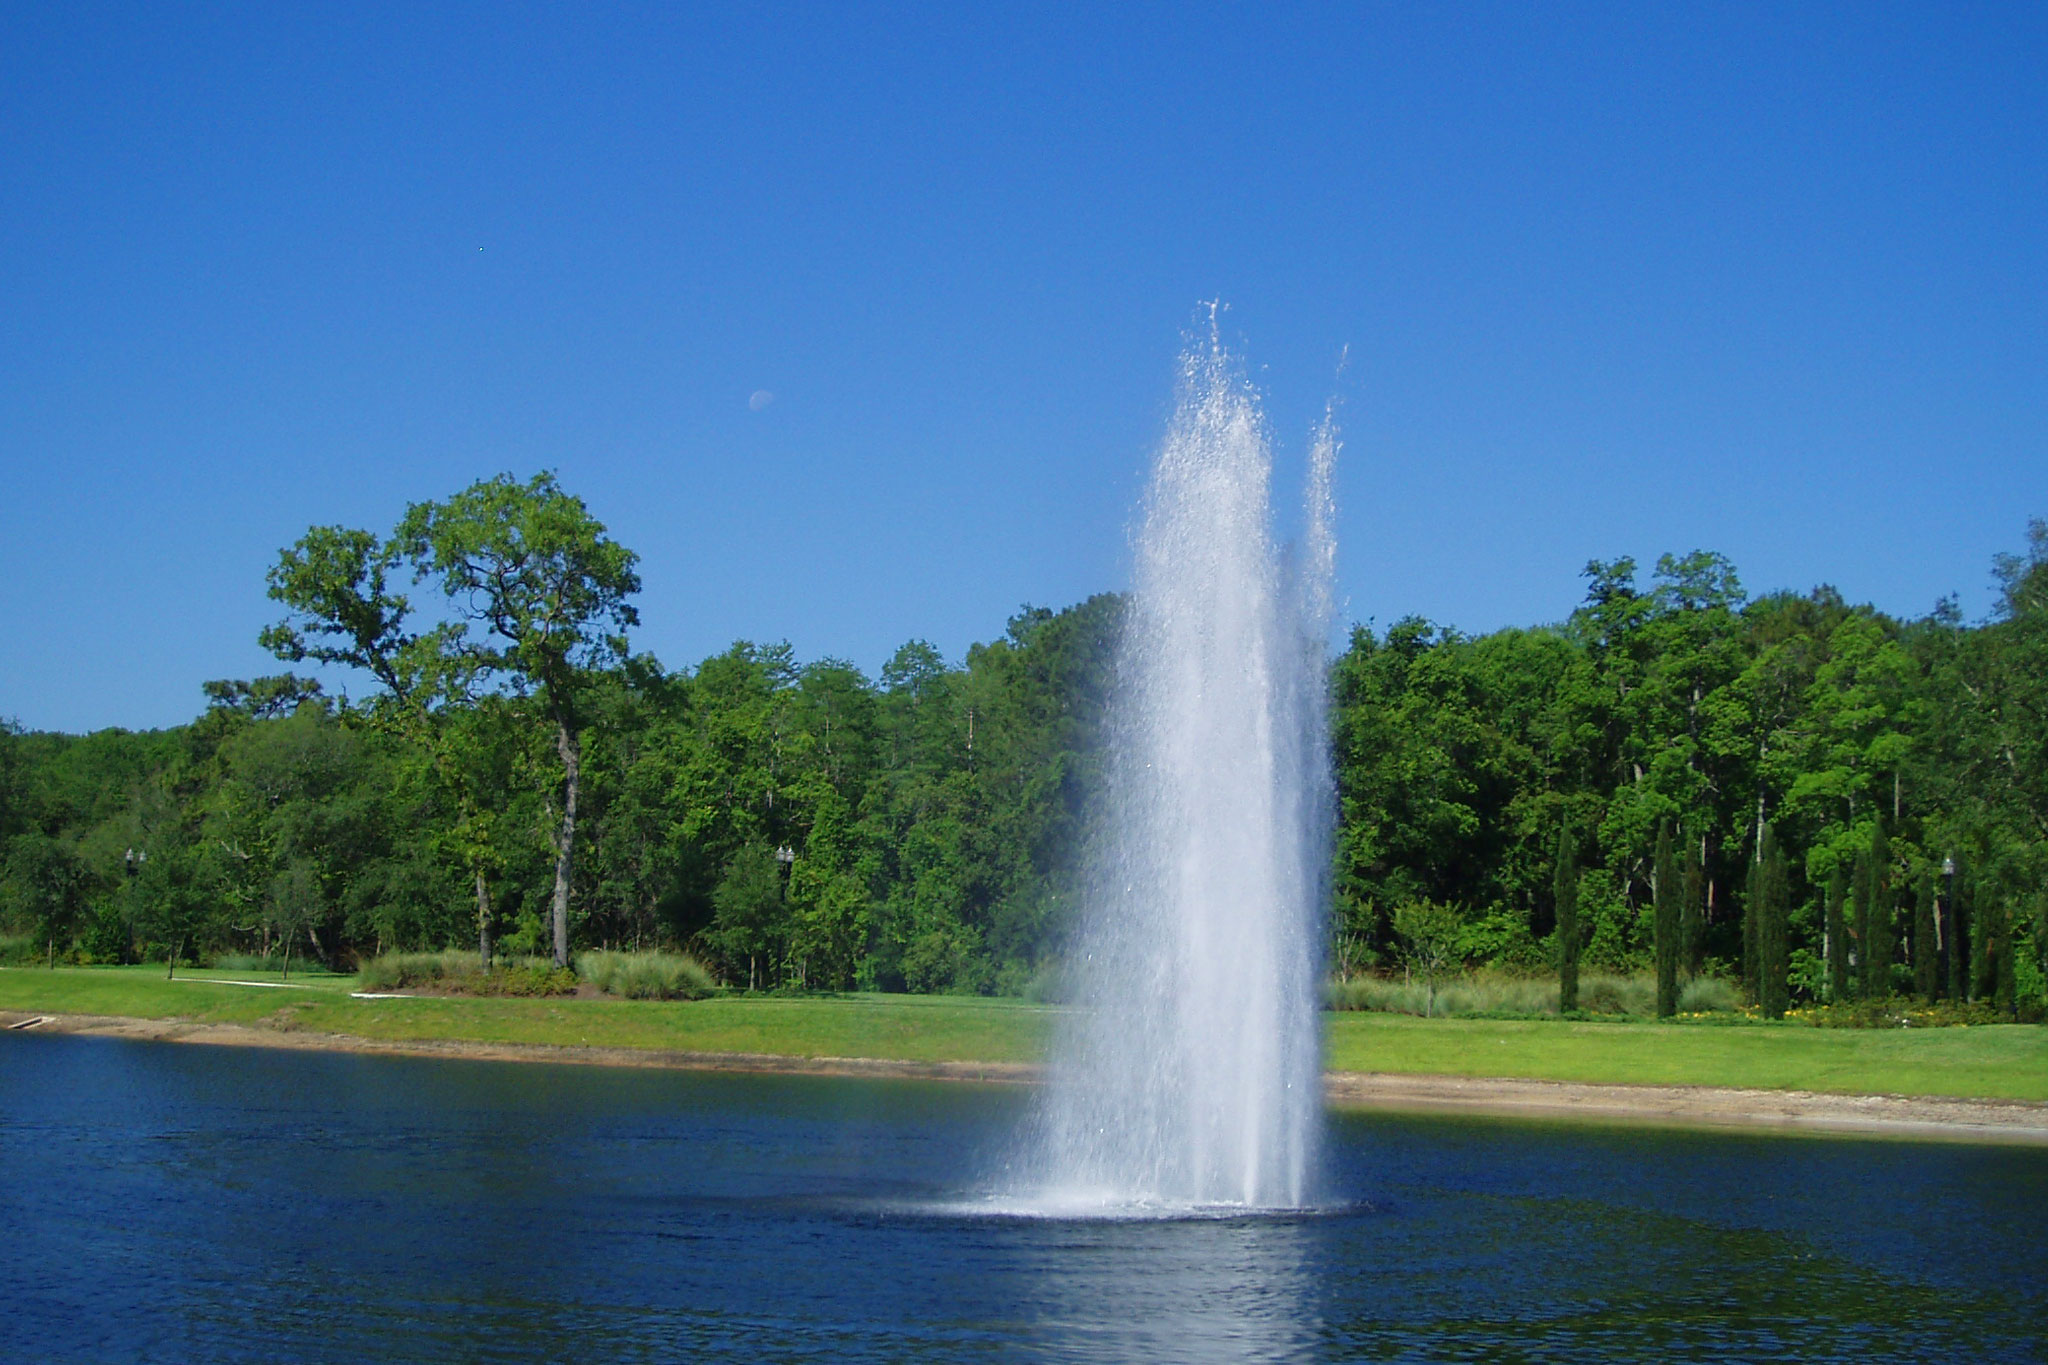 Geyser Nozzle Cluster Fountain In Pond